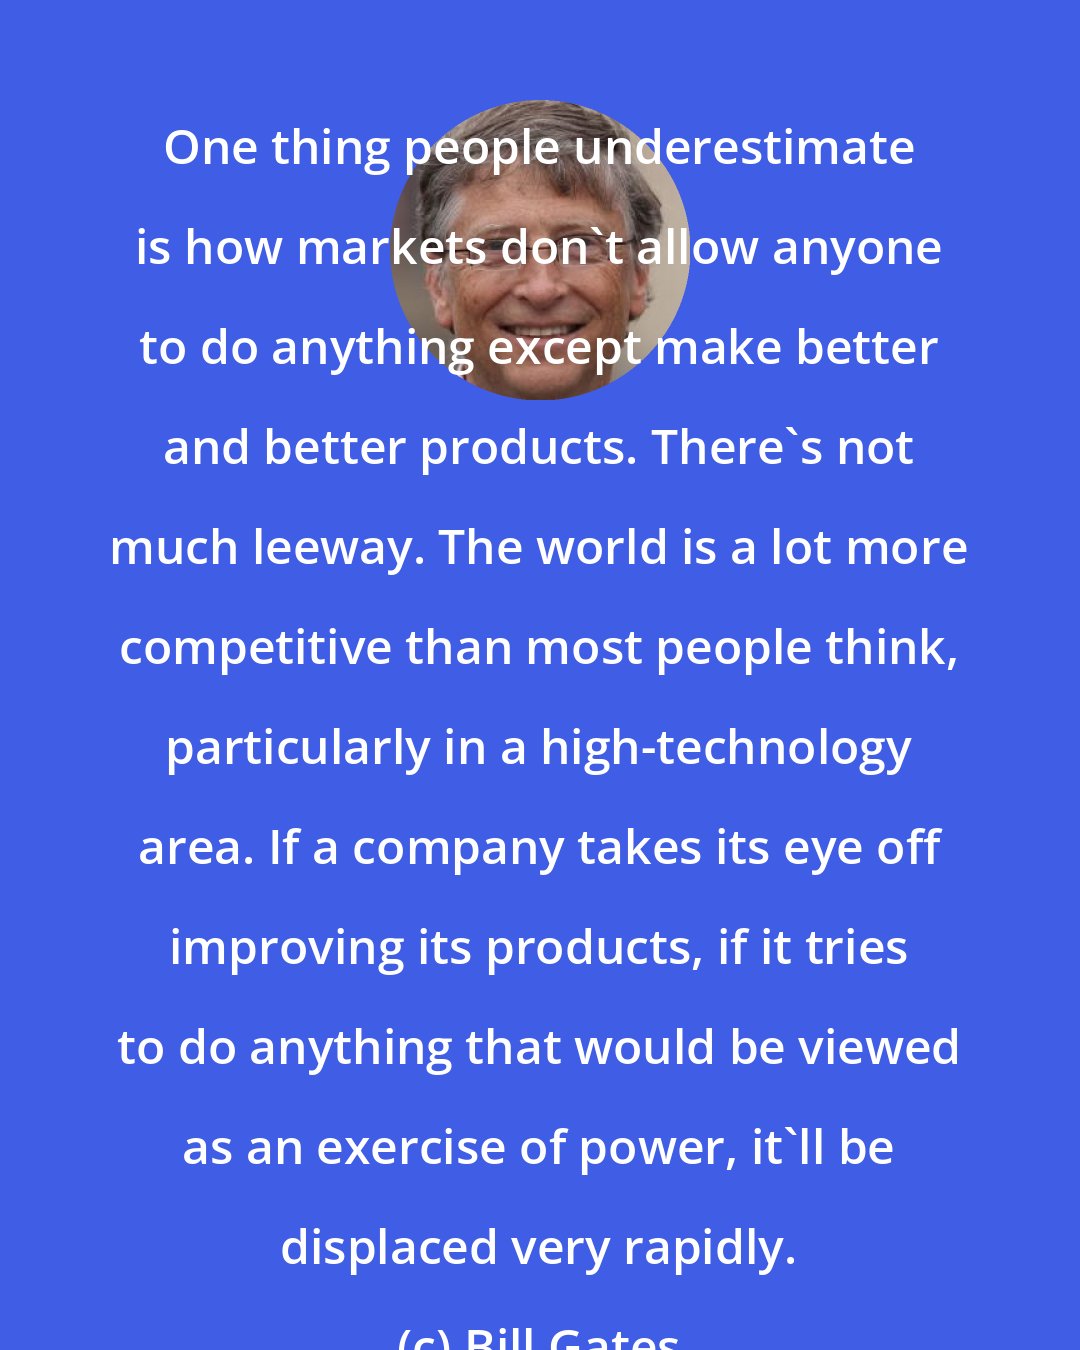 Bill Gates: One thing people underestimate is how markets don't allow anyone to do anything except make better and better products. There's not much leeway. The world is a lot more competitive than most people think, particularly in a high-technology area. If a company takes its eye off improving its products, if it tries to do anything that would be viewed as an exercise of power, it'll be displaced very rapidly.